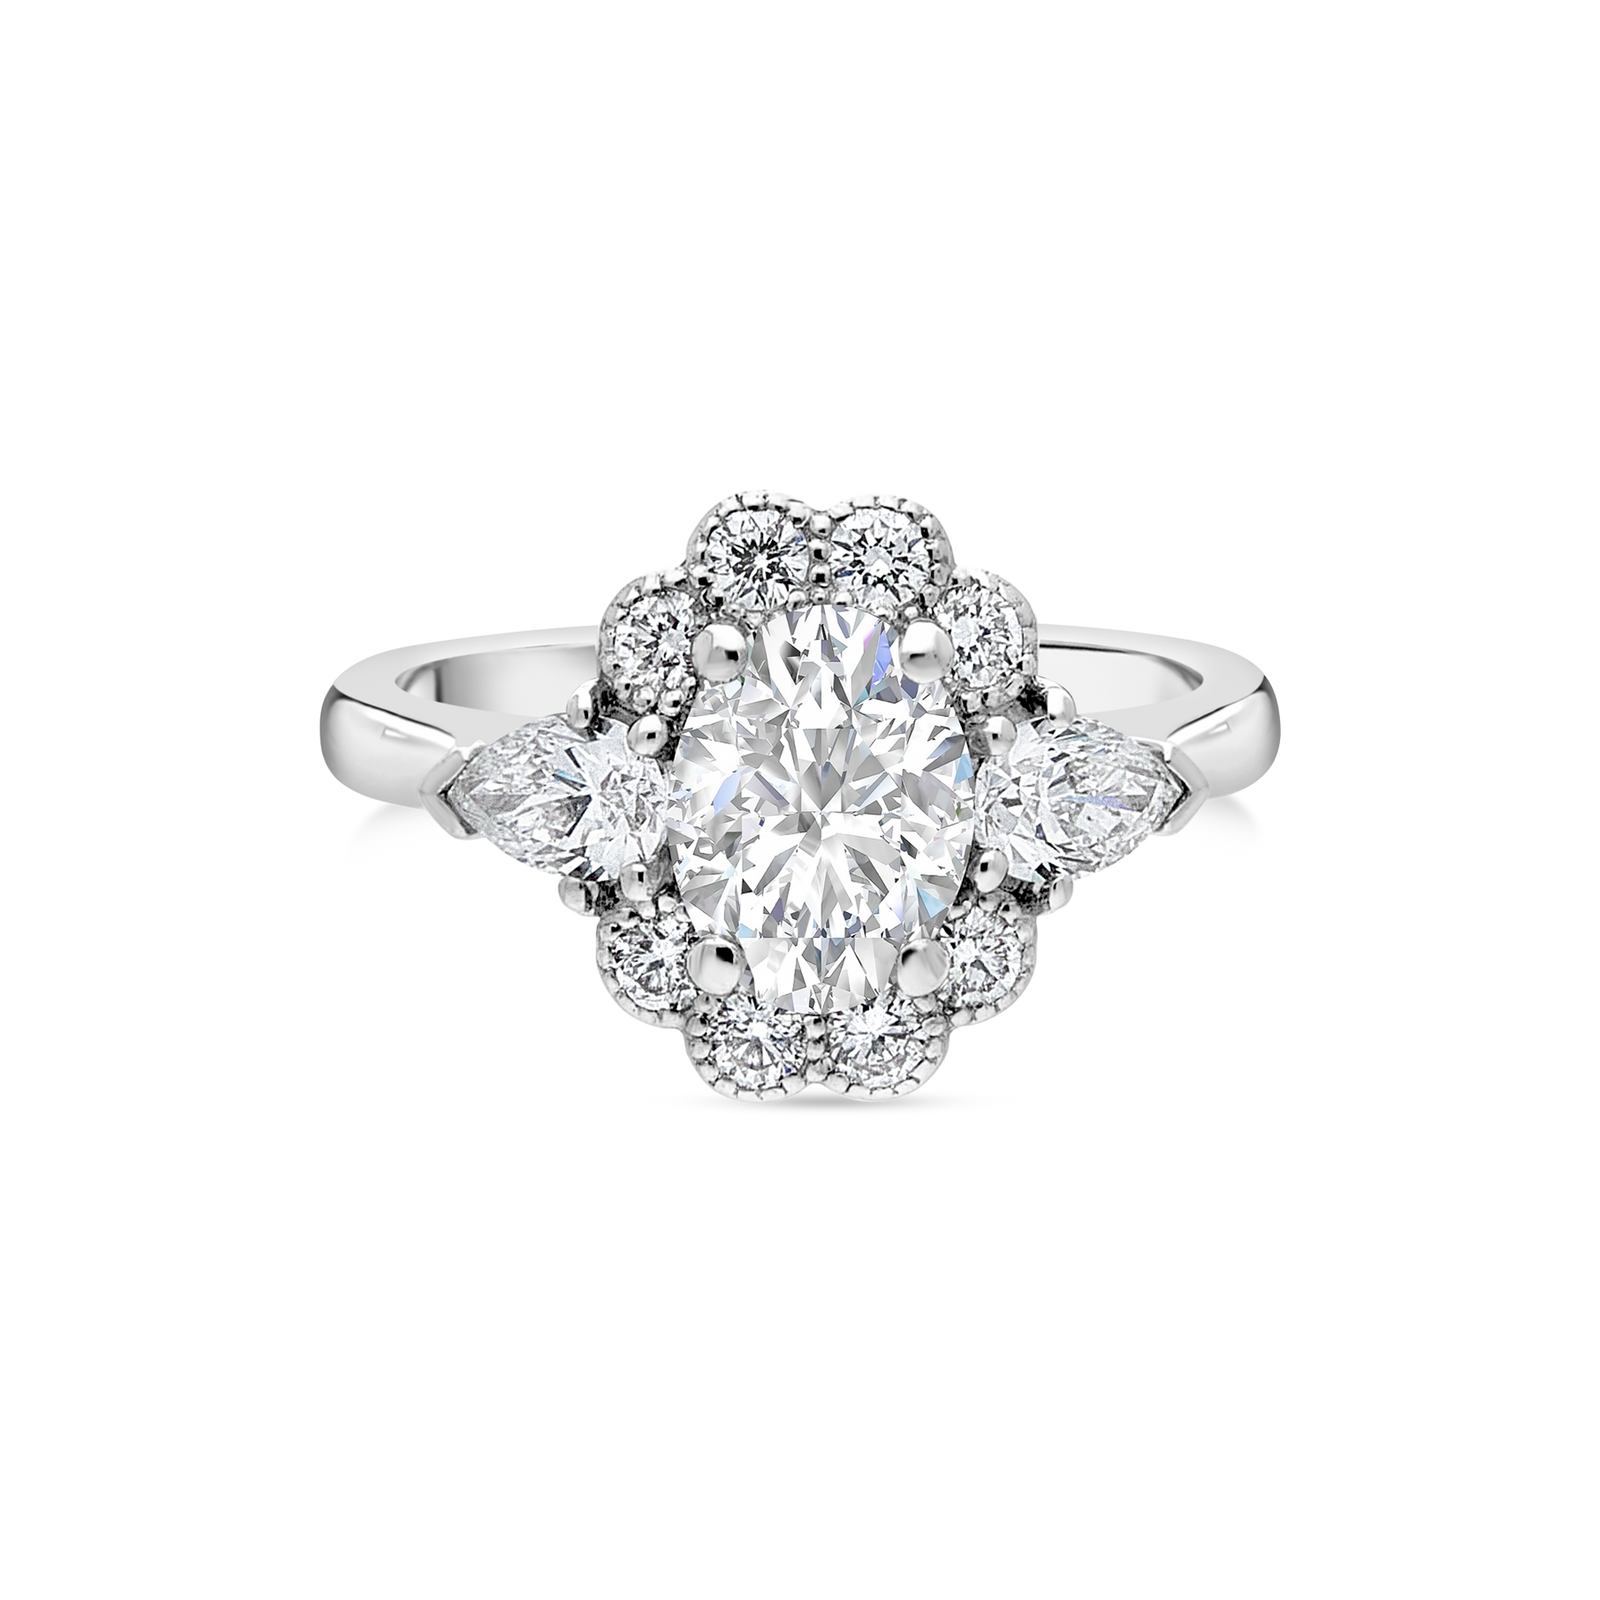 Vintage Style Halo Engagement Rings - Appleby Jewellers Dublin